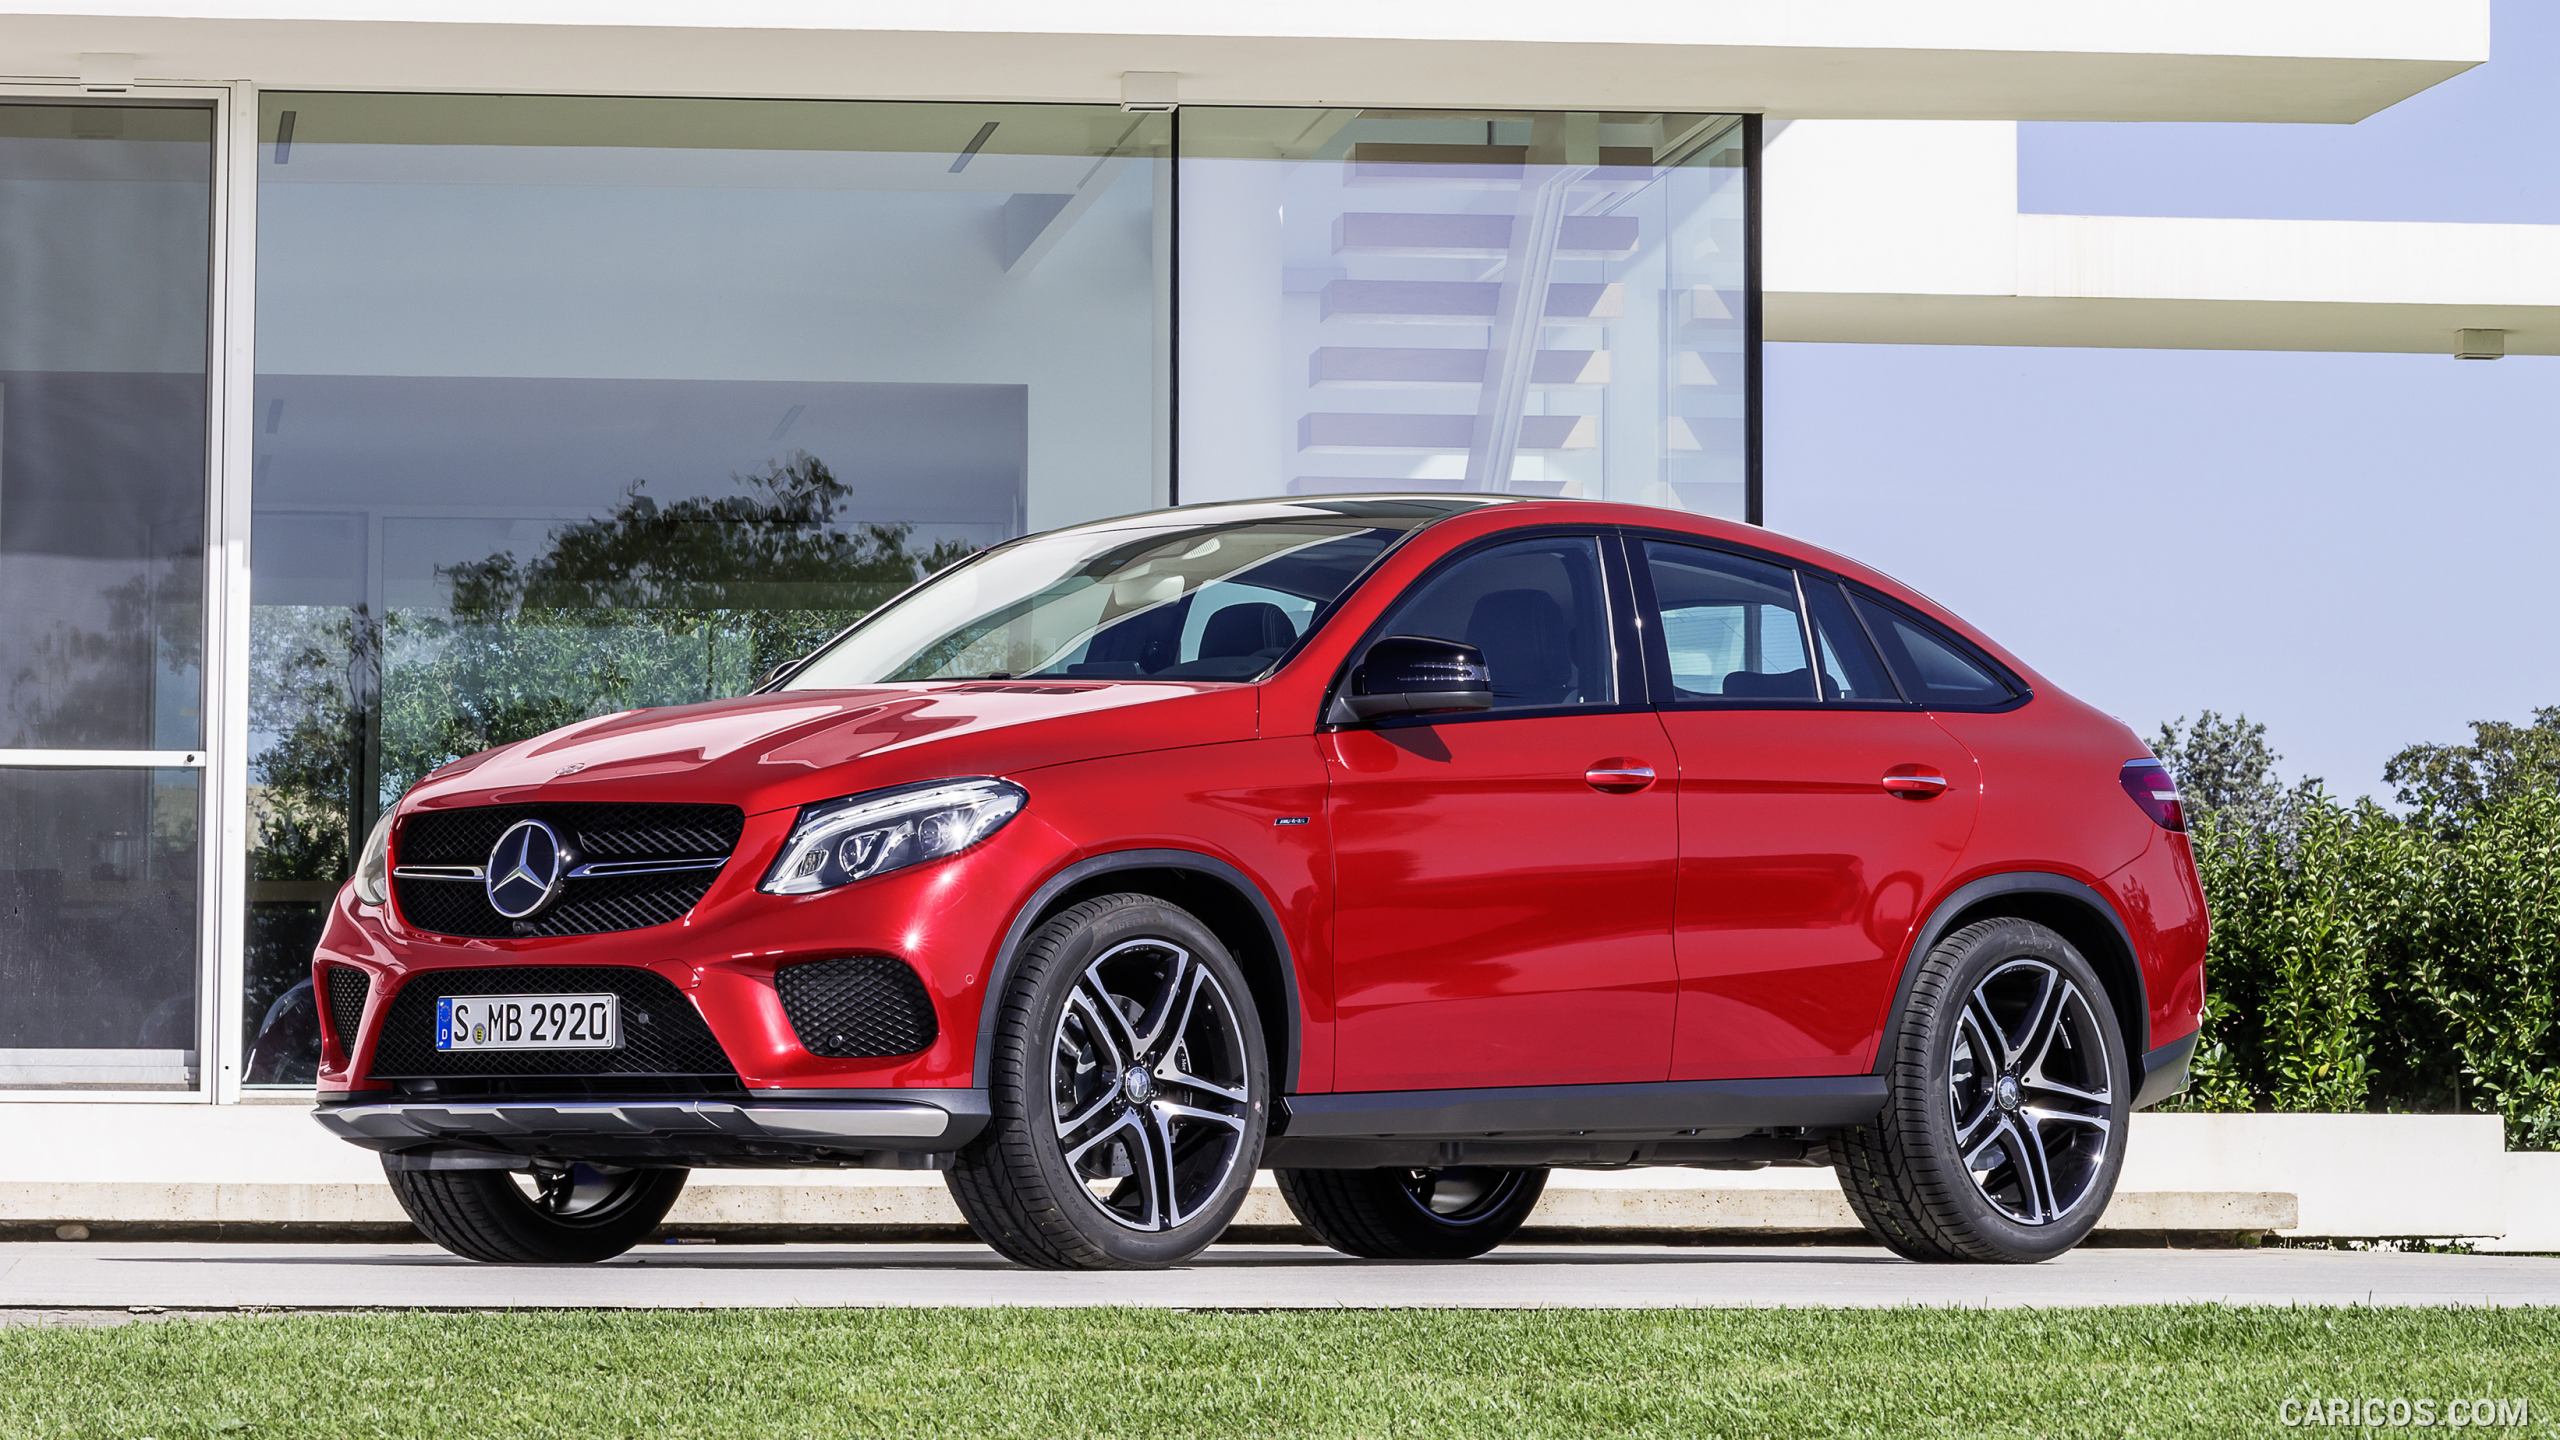 2016 Mercedes-Benz GLE 450 AMG Coupe 4MATIC (Designo Hyacinth Red Metallic) - Front, #9 of 115